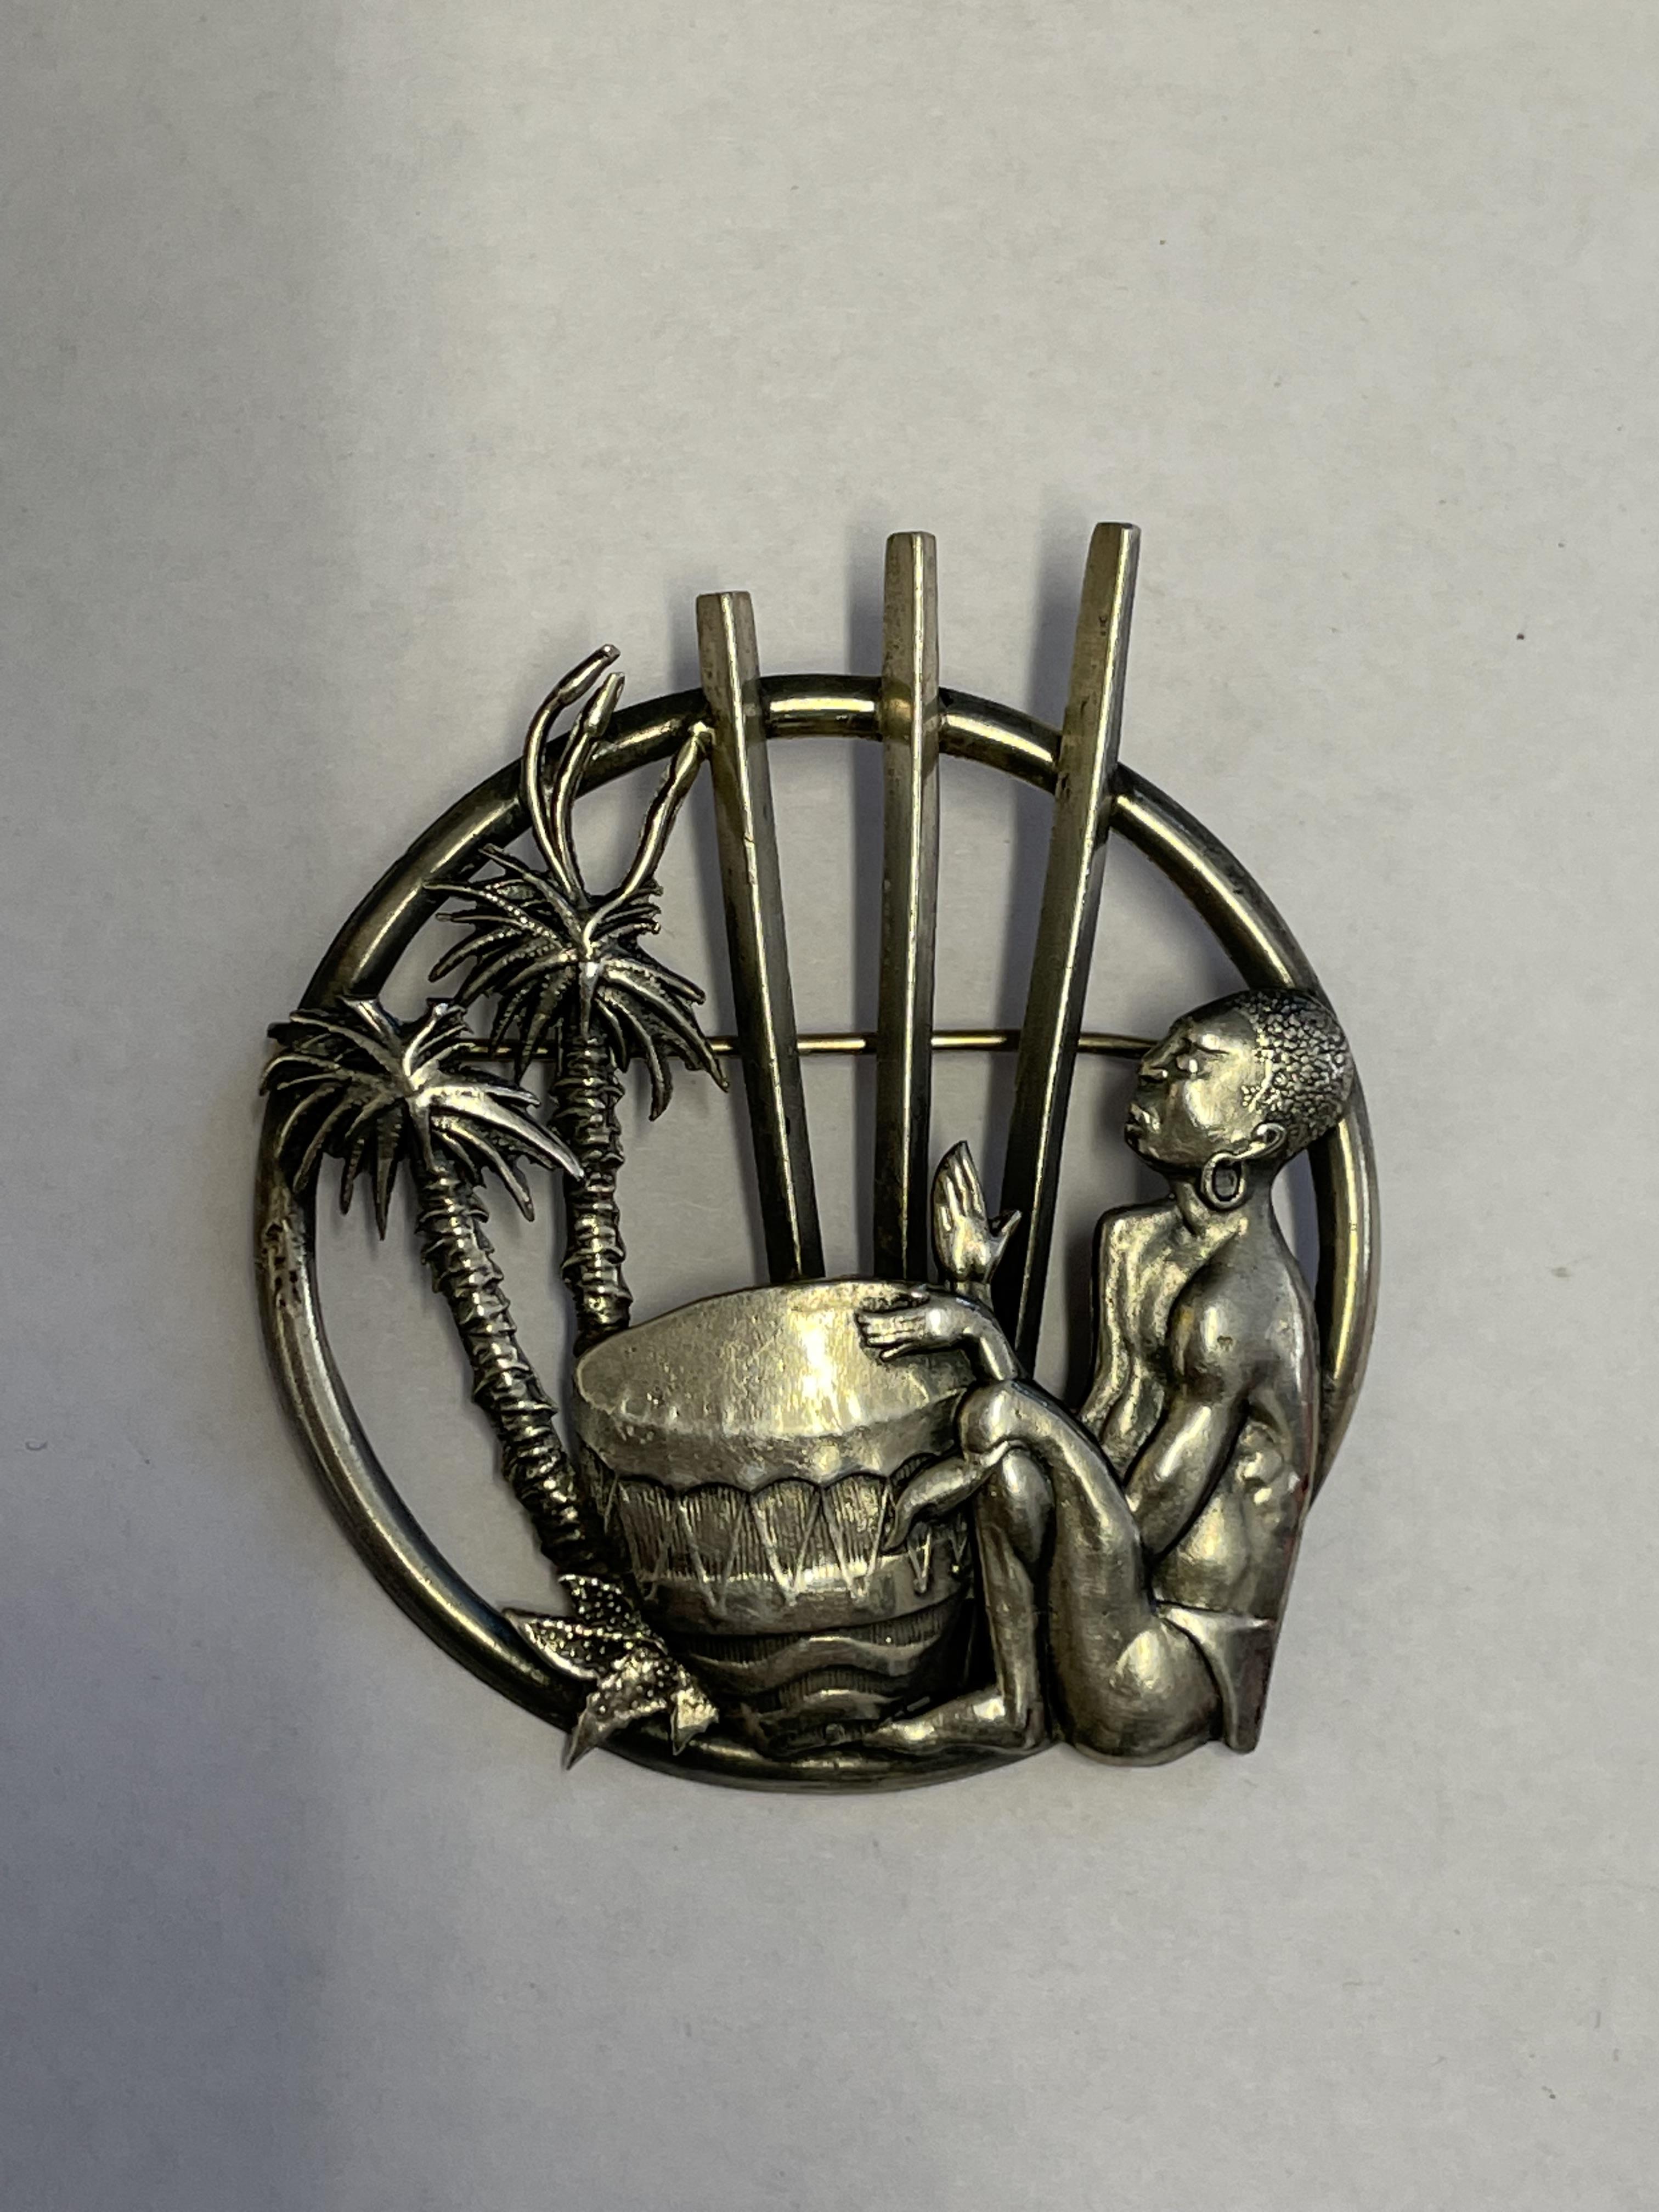 WHITE METAL BROOCH DEPICTING A MAN PLAYING A DRUM AMONGST PALM TREES - Image 2 of 4